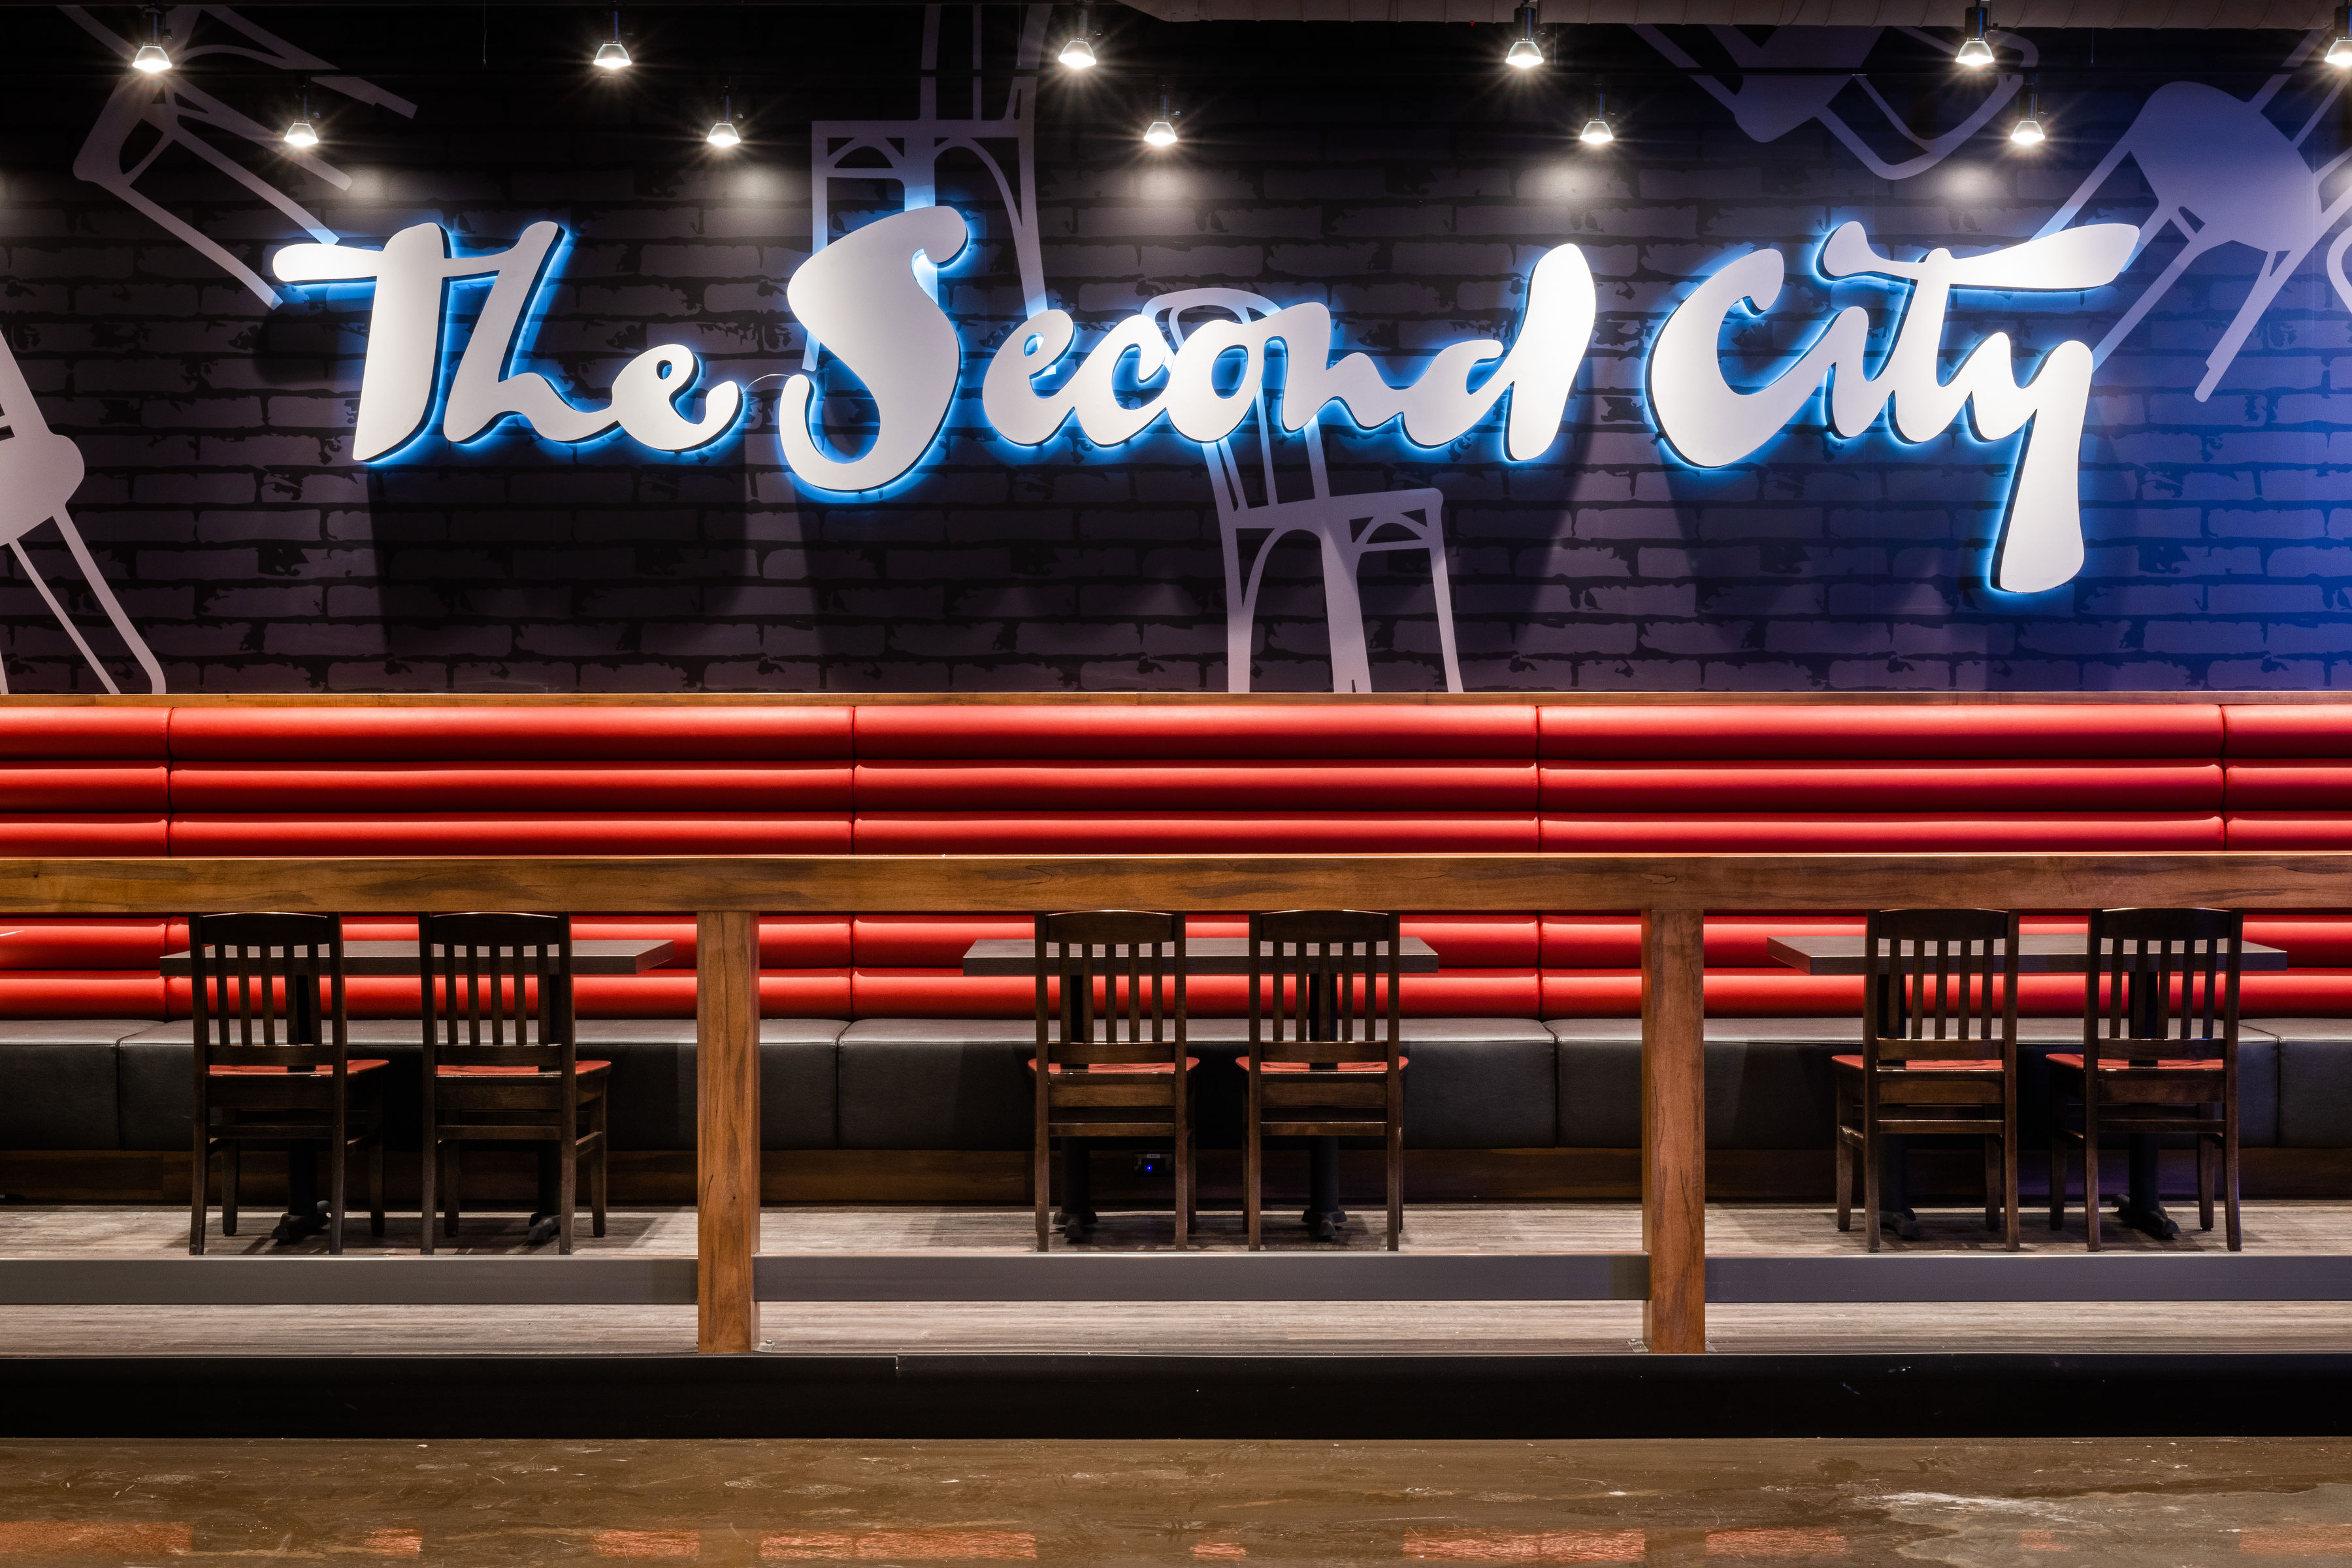 The Second City Toronto's New Home at One York Street Will Have Its Grand Opening on November 30